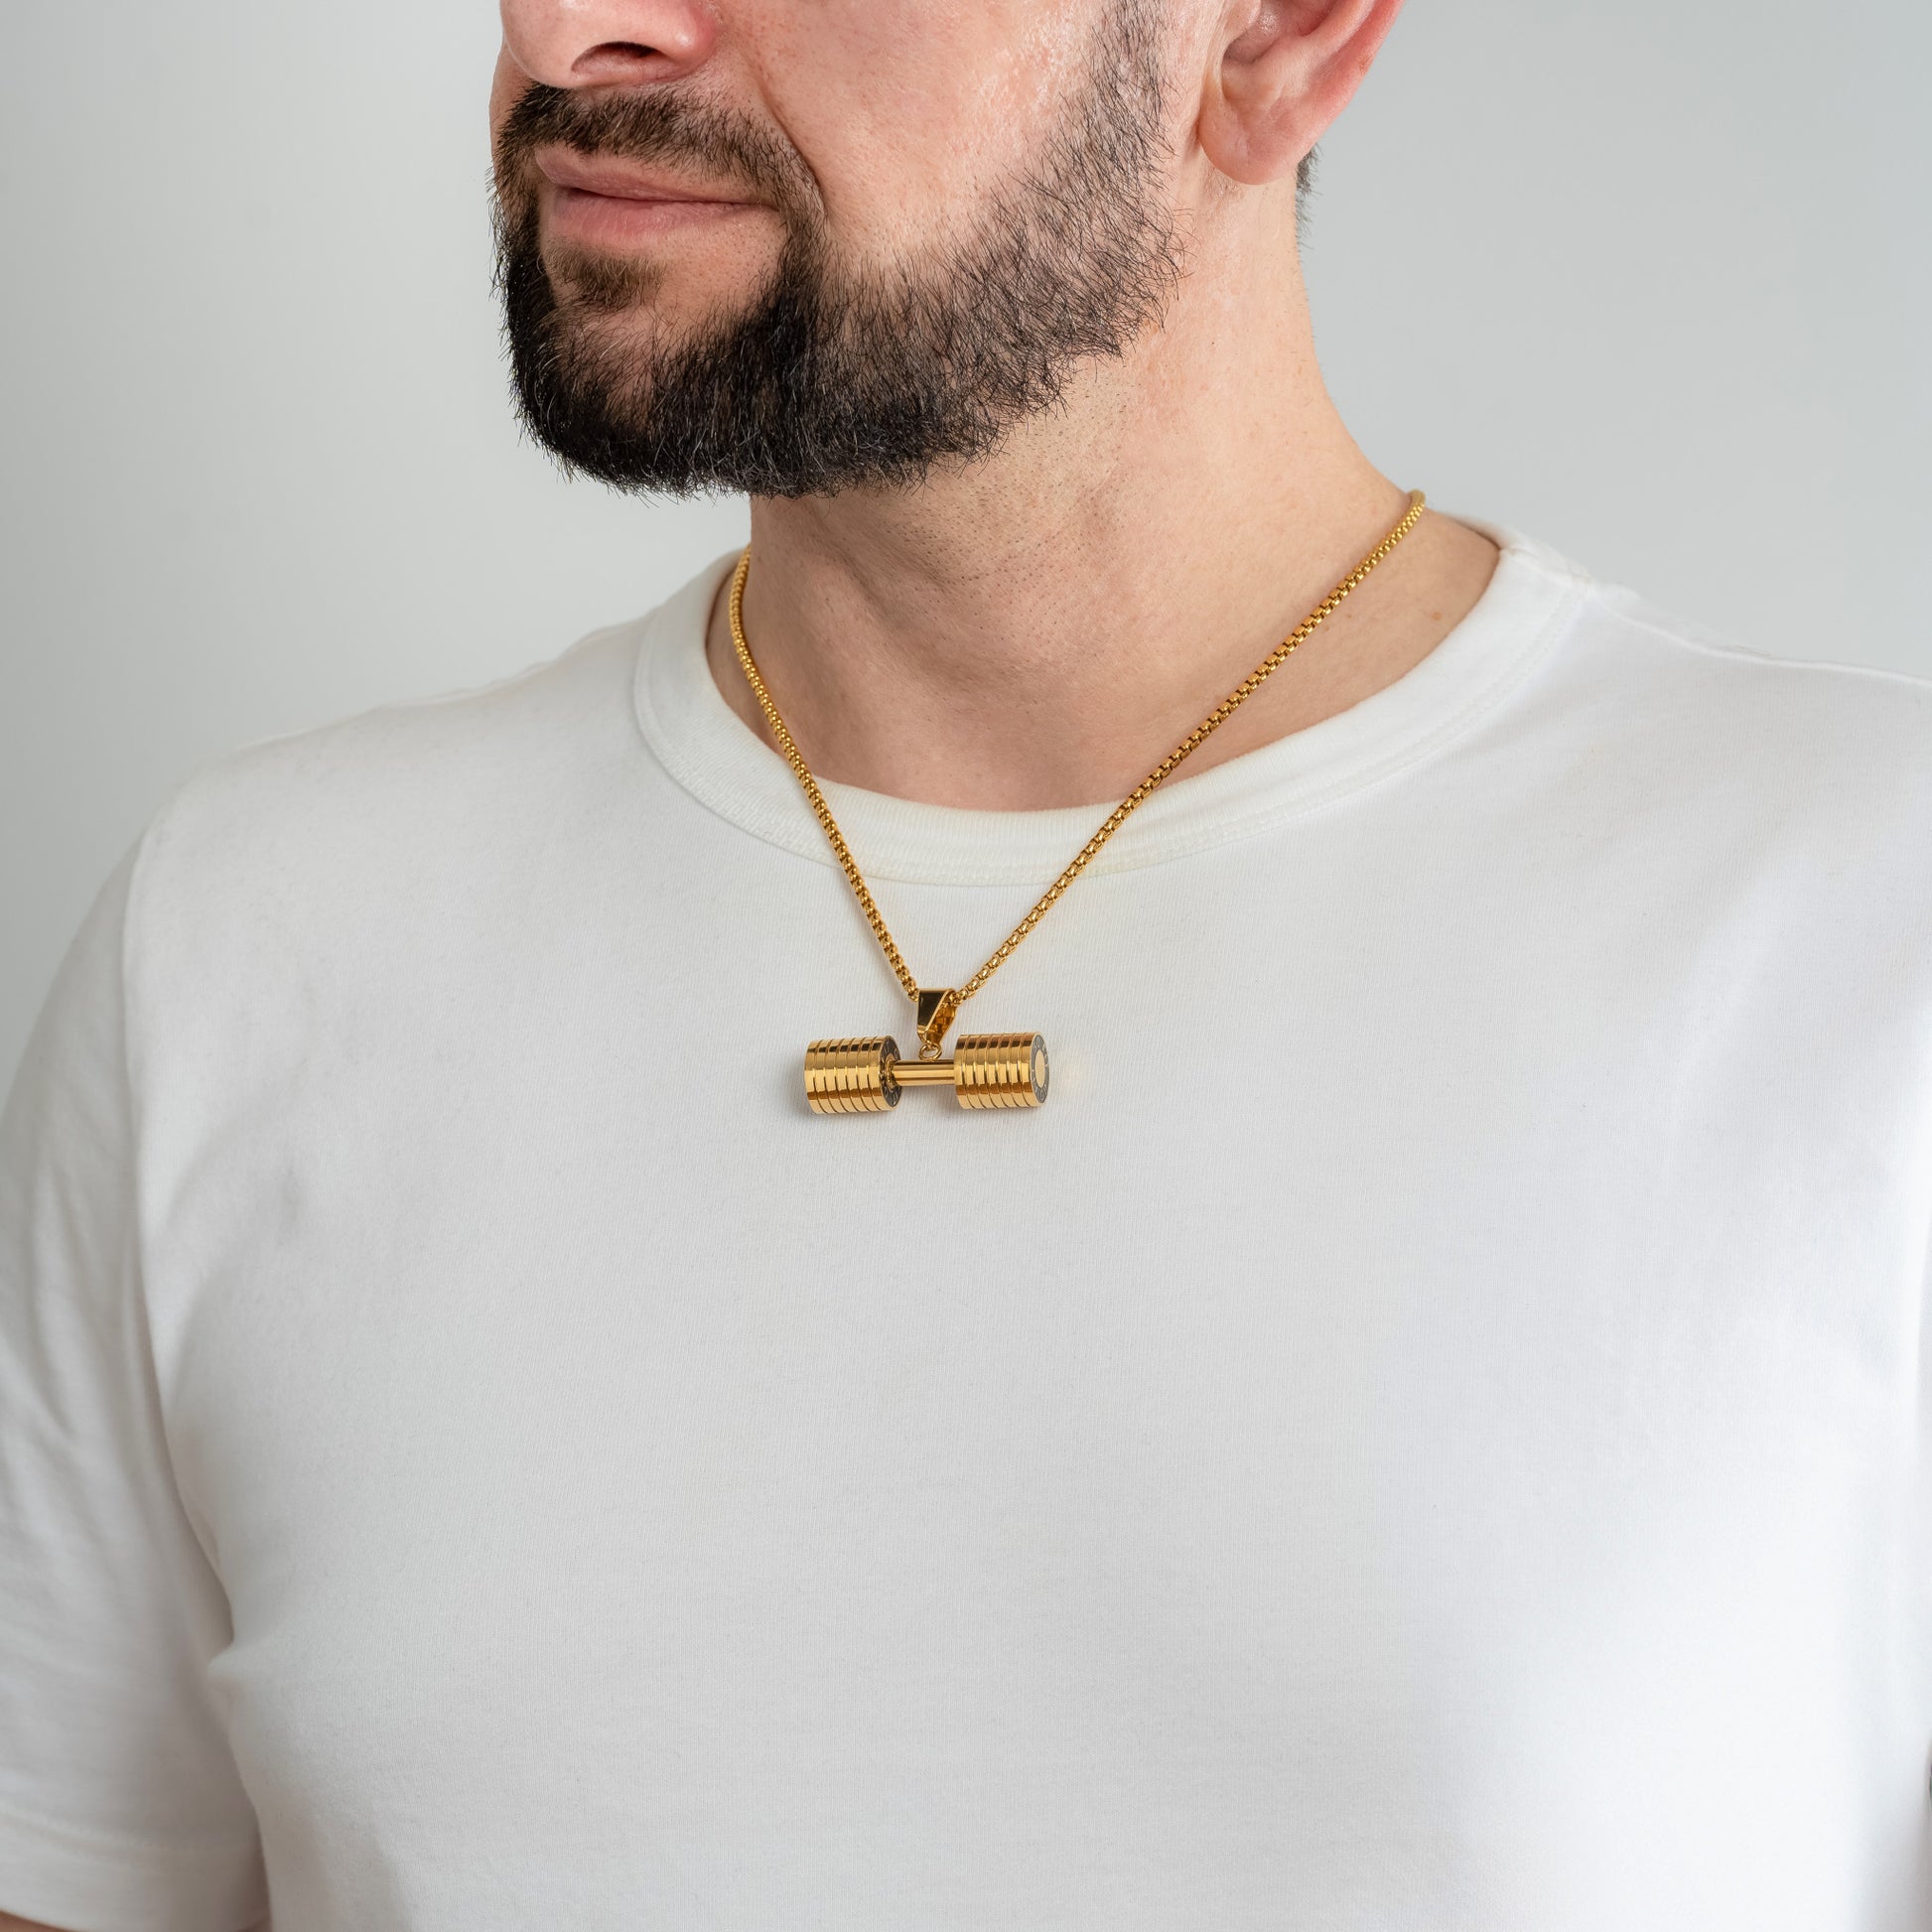 A male model in a white t-shirt wearing a Dumbbell Fitness Gold Pendant with a 3mm Round Box link Gold chain 22 inches.